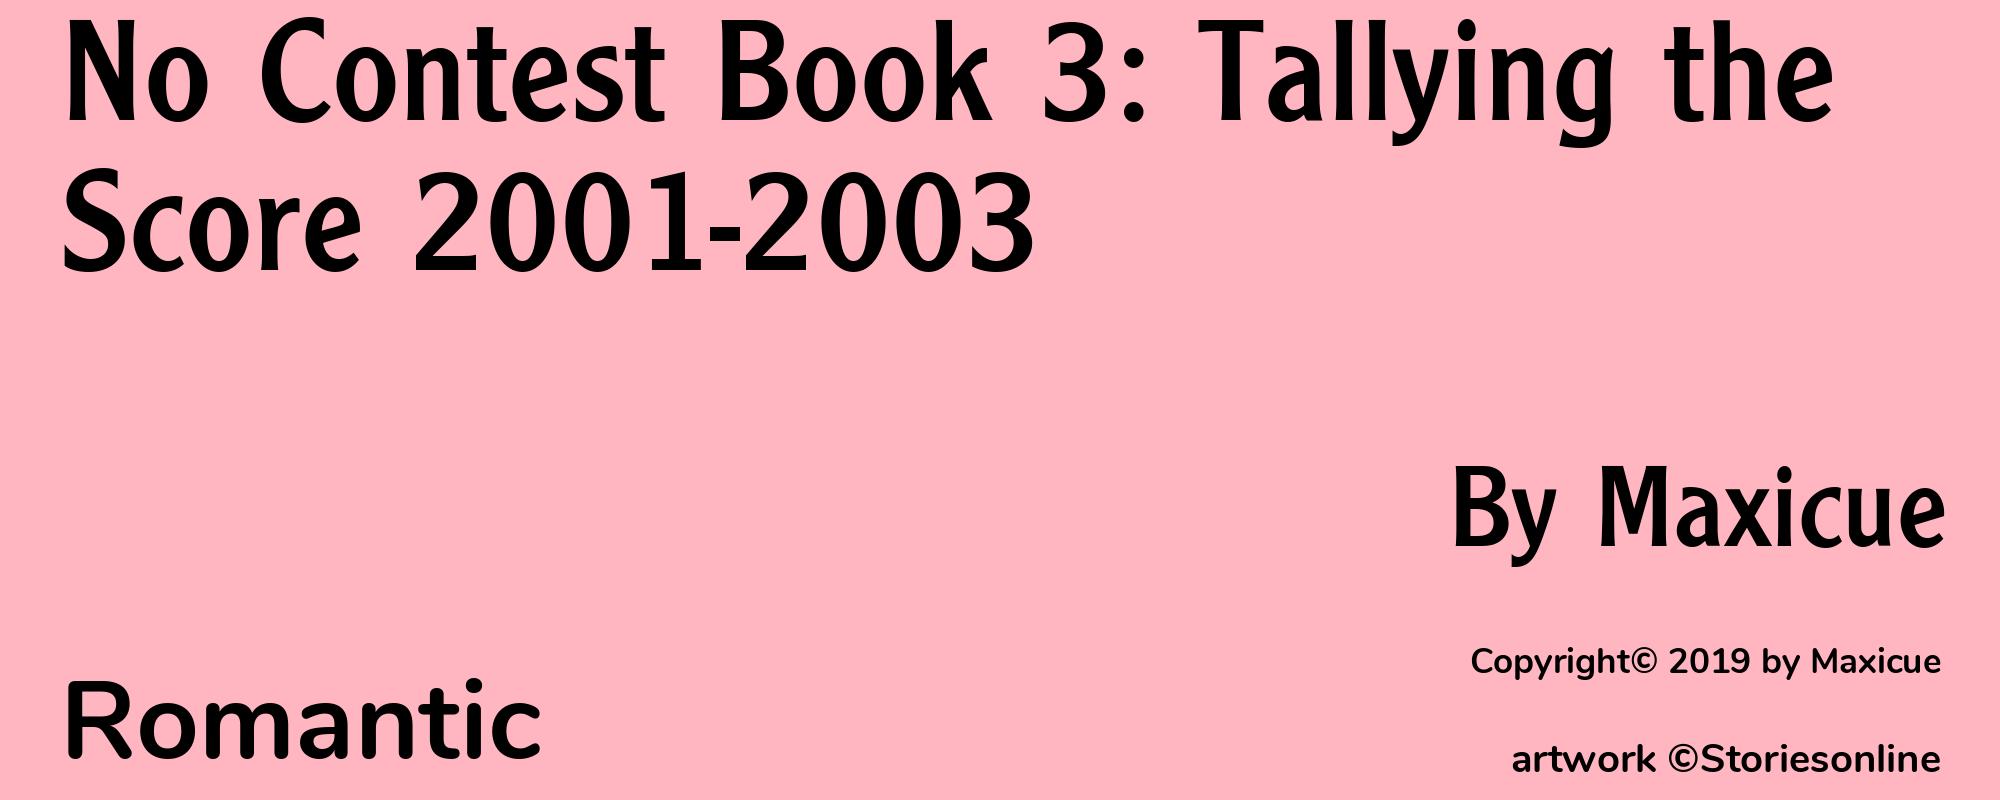 No Contest Book 3: Tallying the Score 2001-2003 - Cover